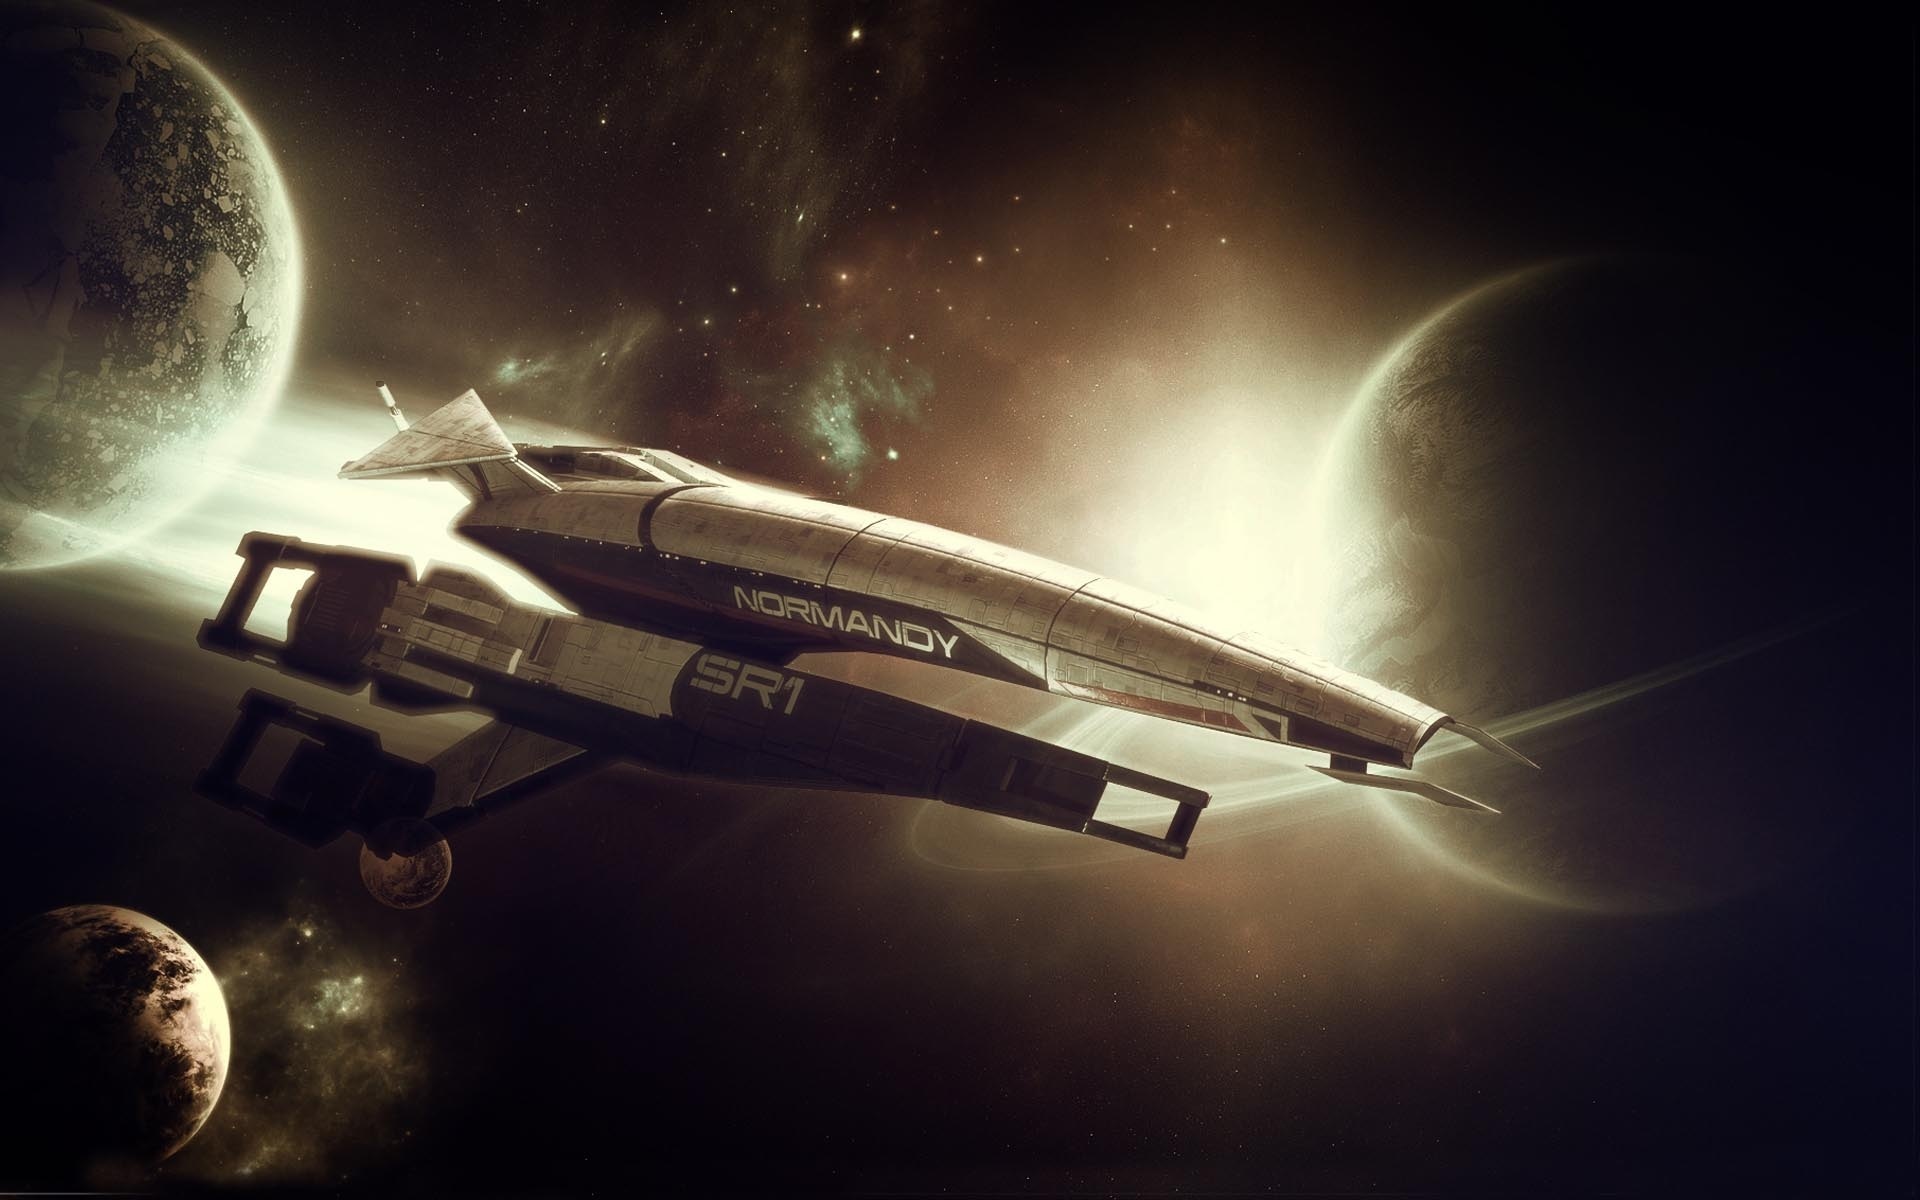 Space Planet Mass Effect Spaceship Normandy SR 1 1920x1200